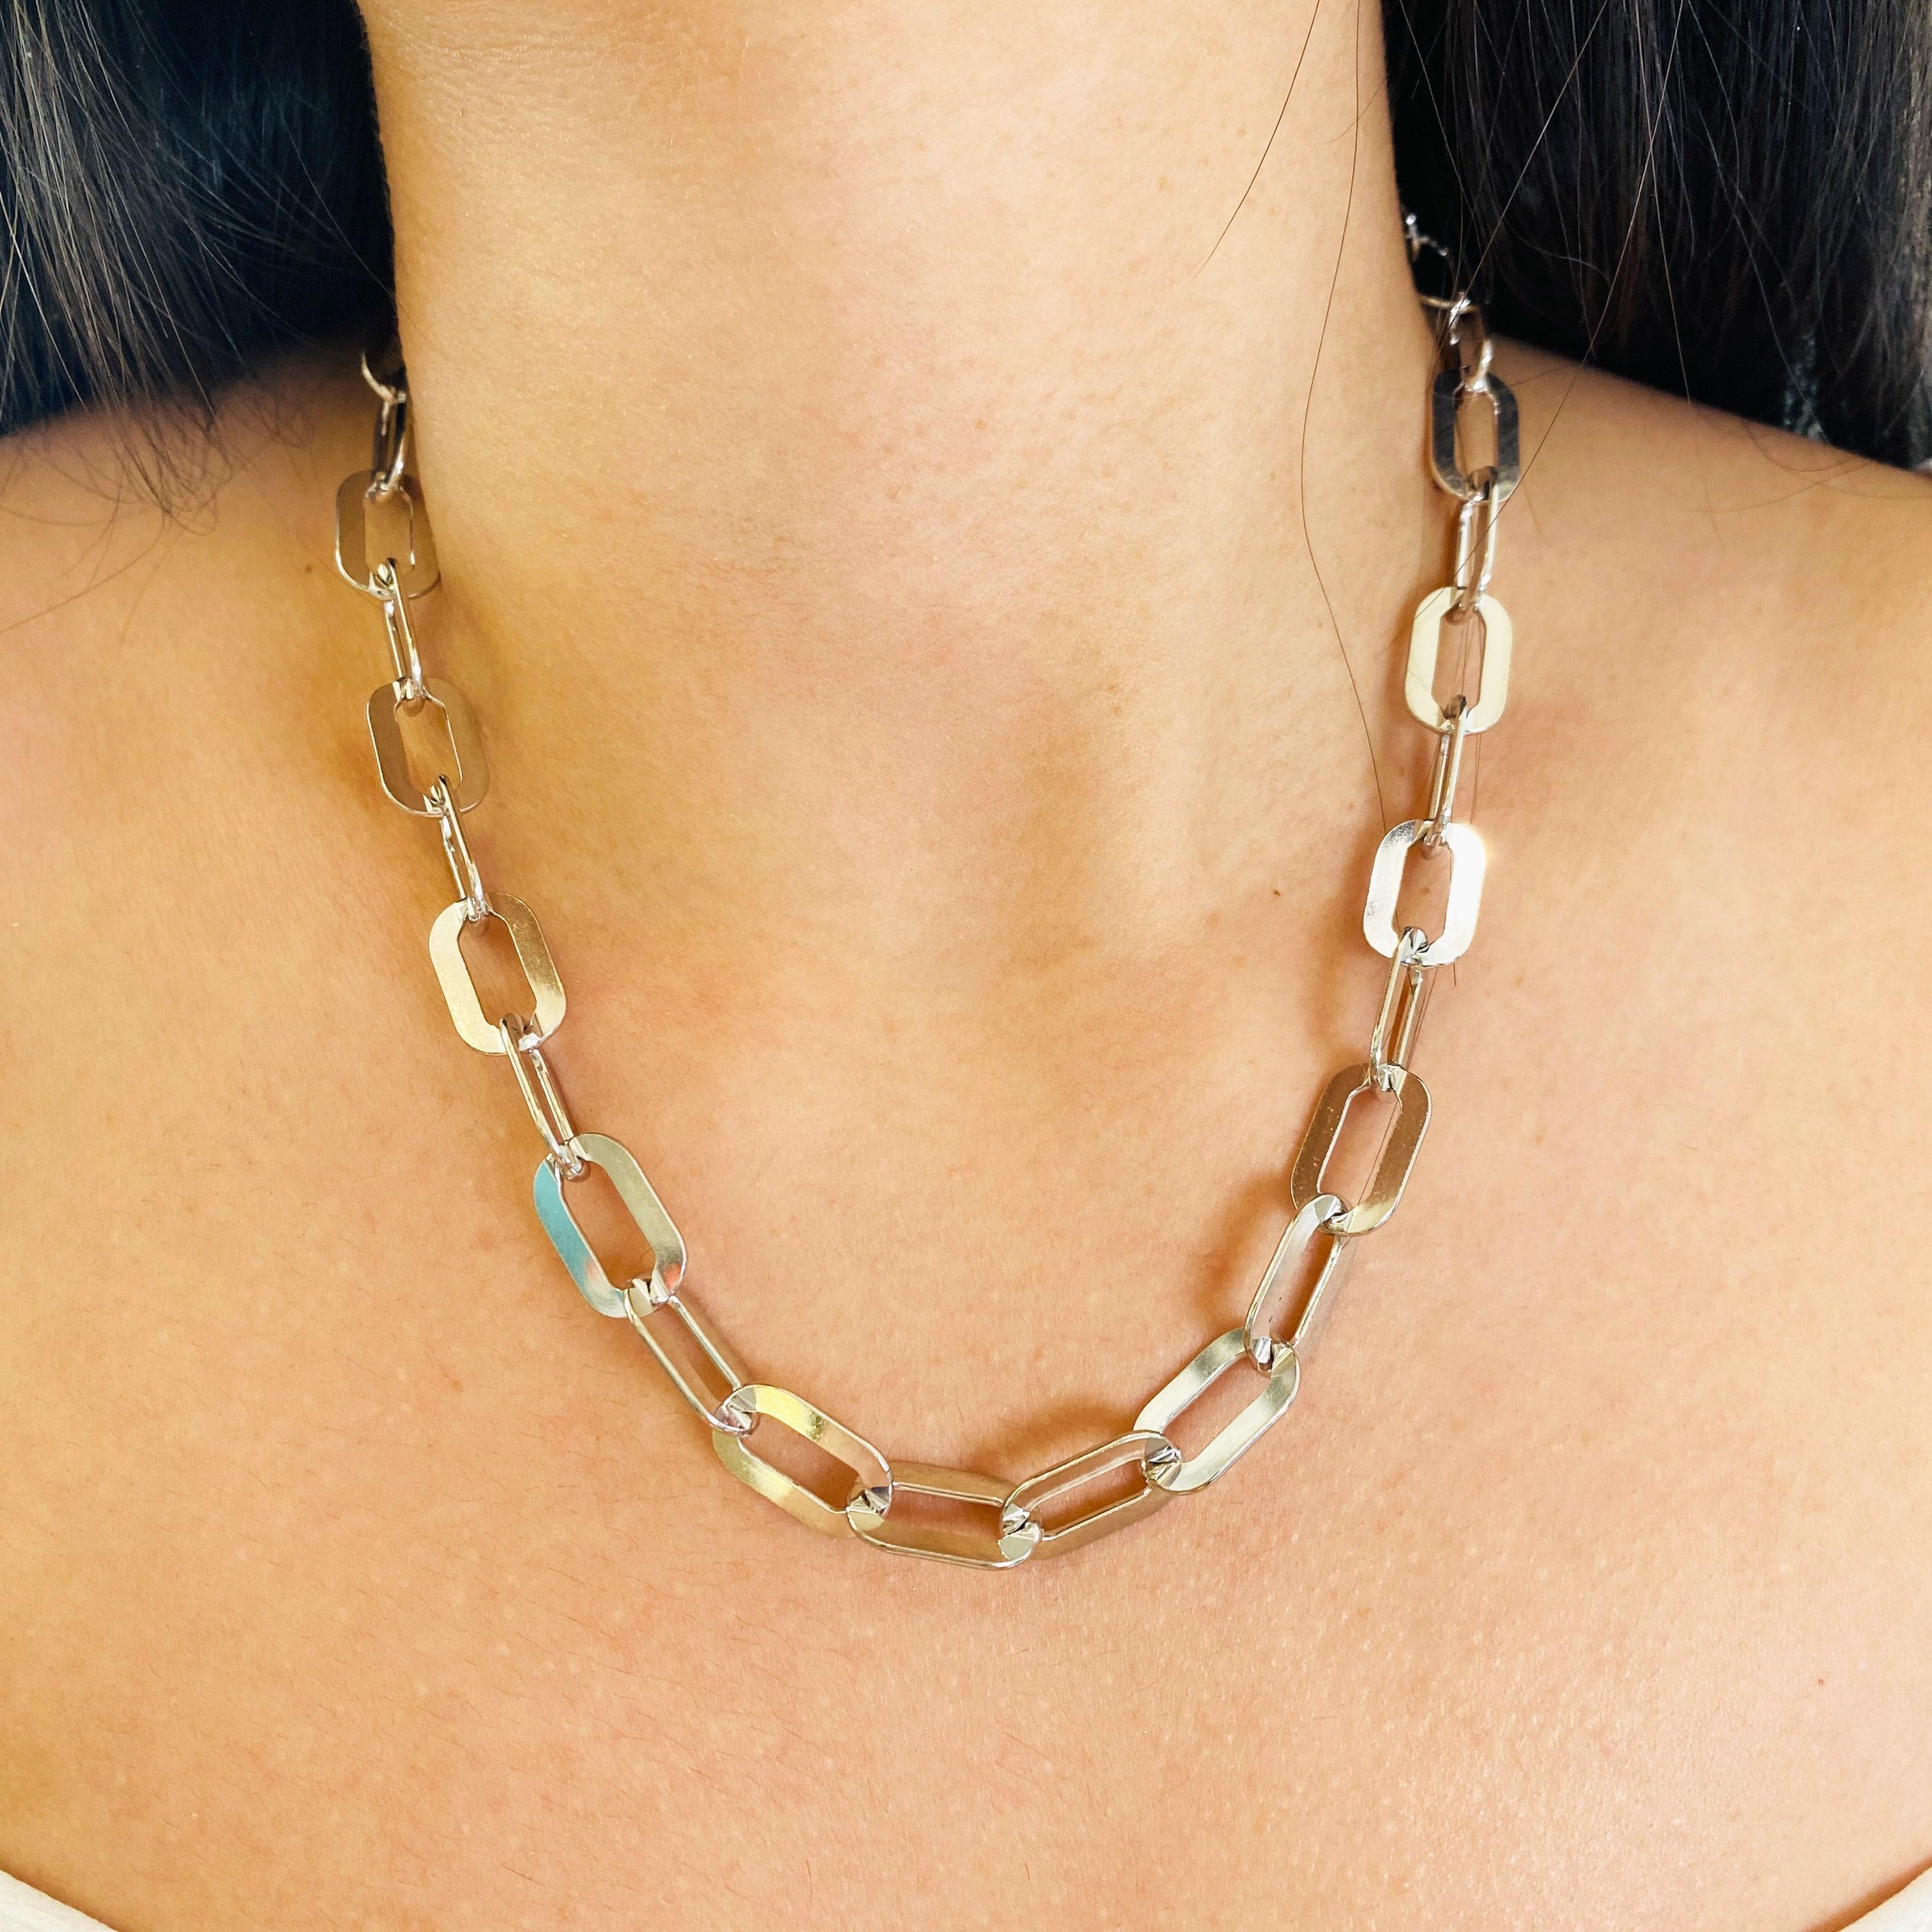 Paperclip chains are making a splash as stylish and modern pieces to compliment any outfit! This substantial and stunning 10 millimeter (mm) wide paperclip flat link necklace was made for us in Italy with recycled sterling silver and finished